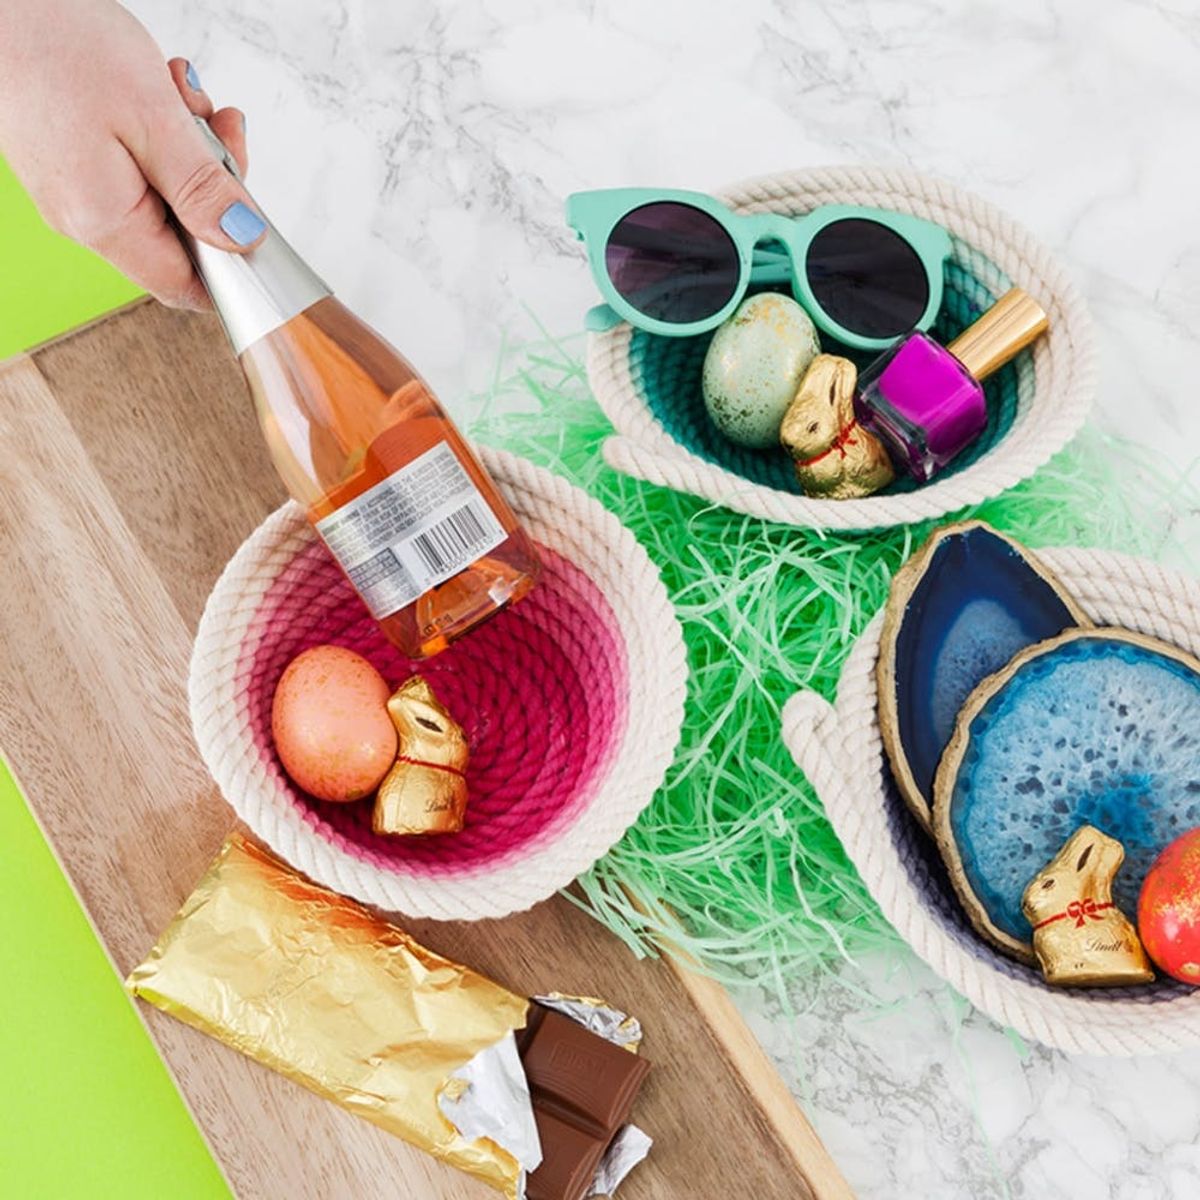 3 Creative Ways to Make Your Own Grown-up Easter Basket